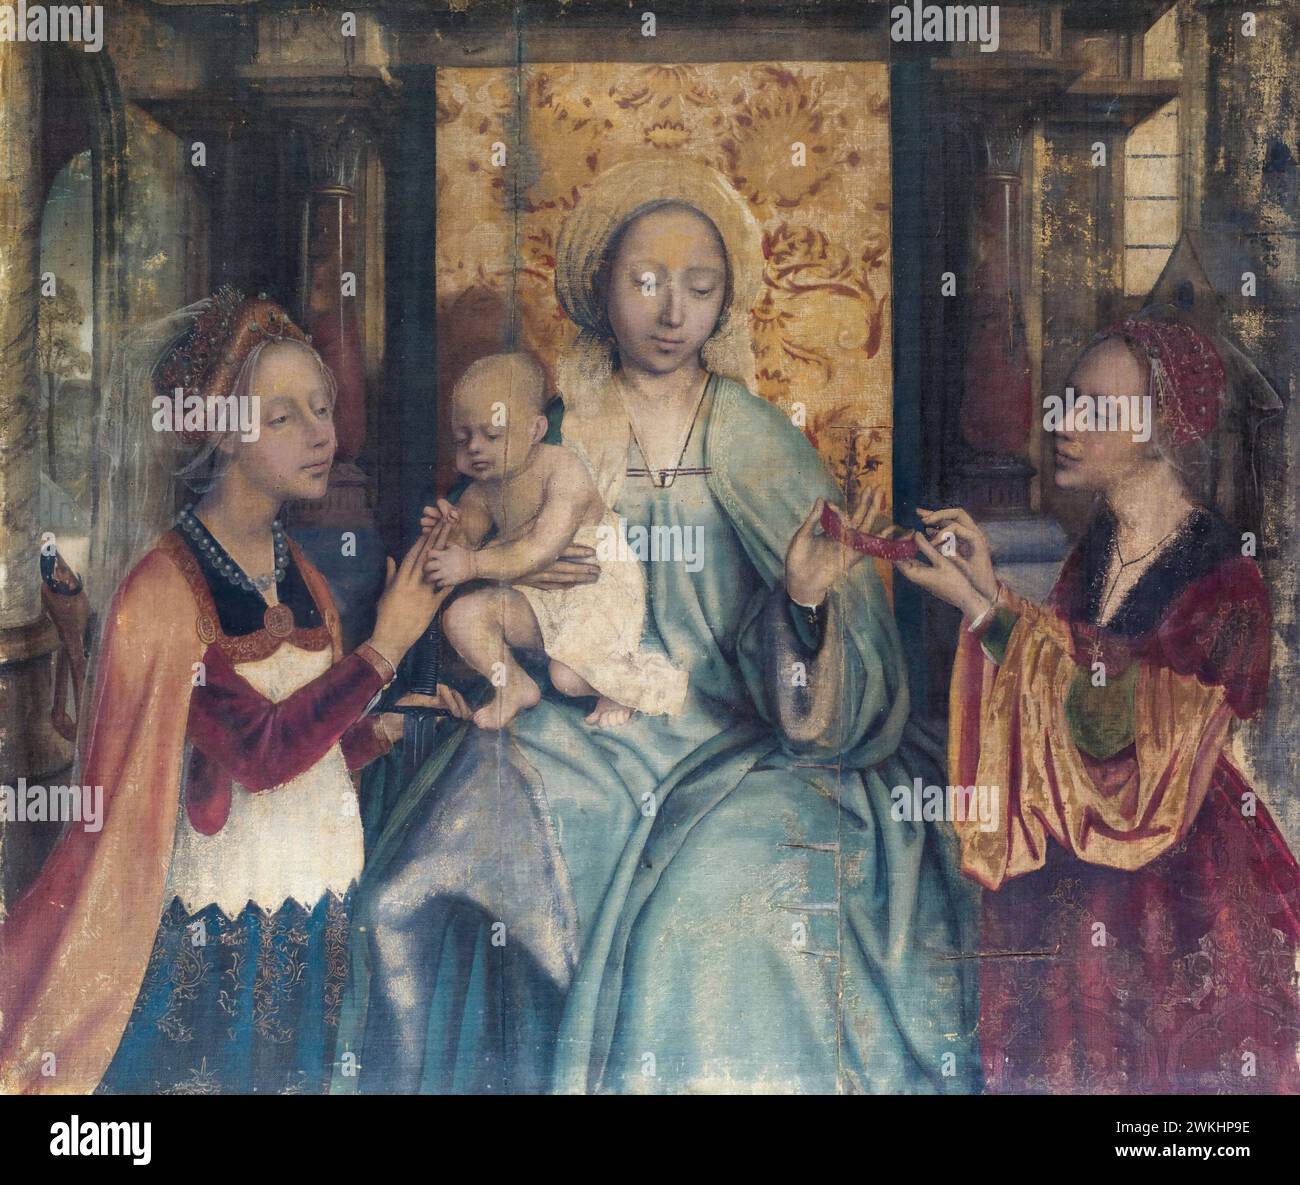 Quinten Massys, 16th Century Netherlandish cloth painting, The Virgin and Child with Saints Catherine and Barbara, glue on linen, 1515-1525 Stock Photo